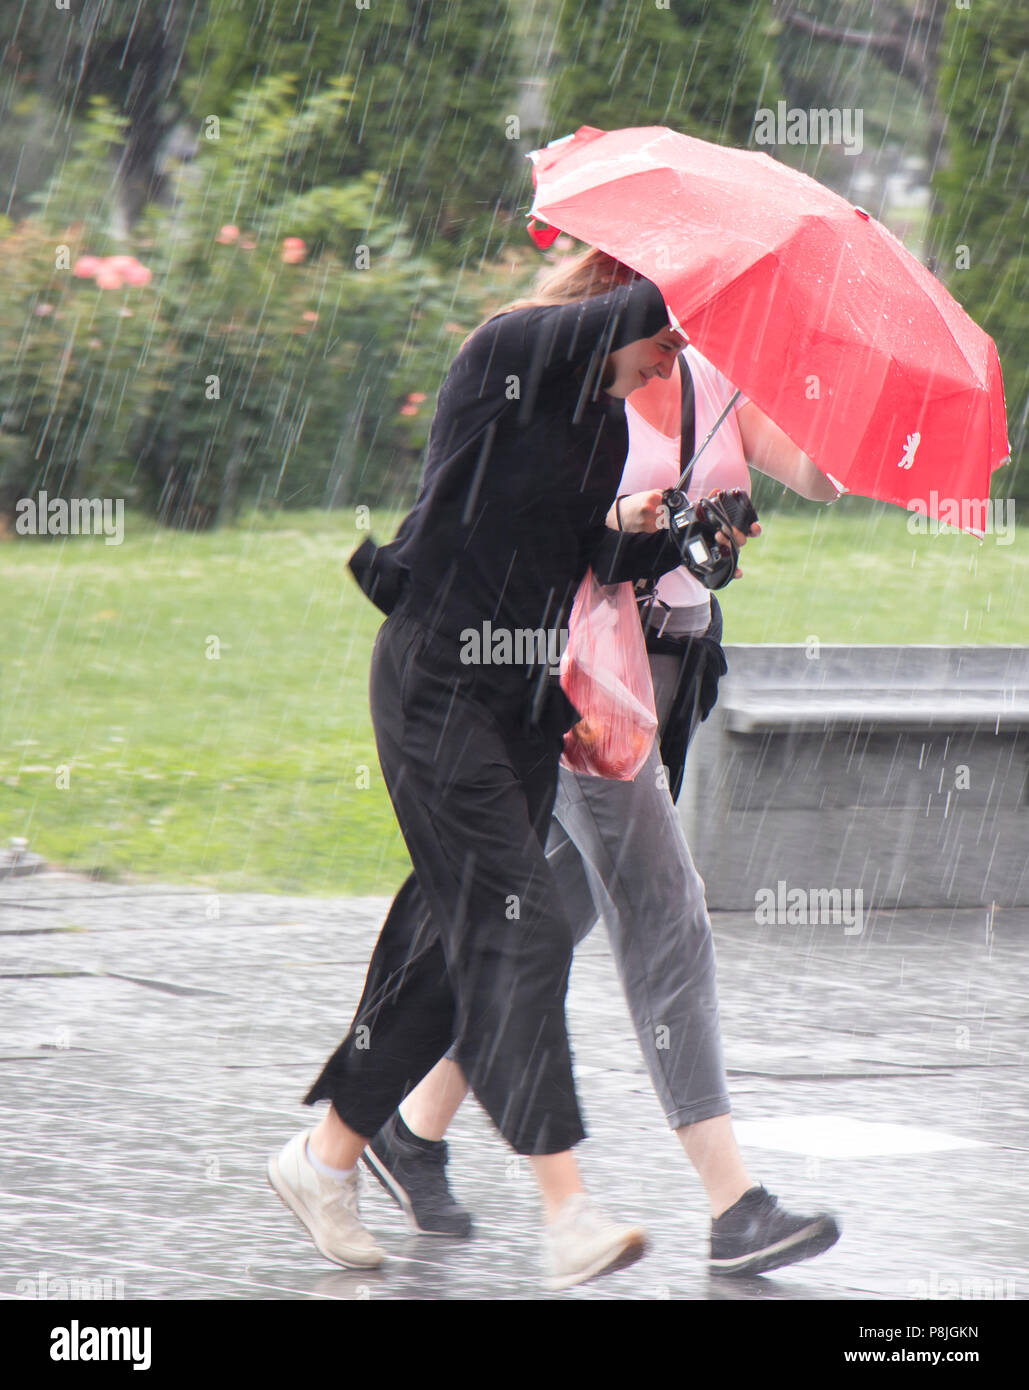 Belgrade, Serbia - June 14, 2018: Two young women running under red umbrella in the sudden  heavy spring rain in the city park , holding a camera and  Stock Photo